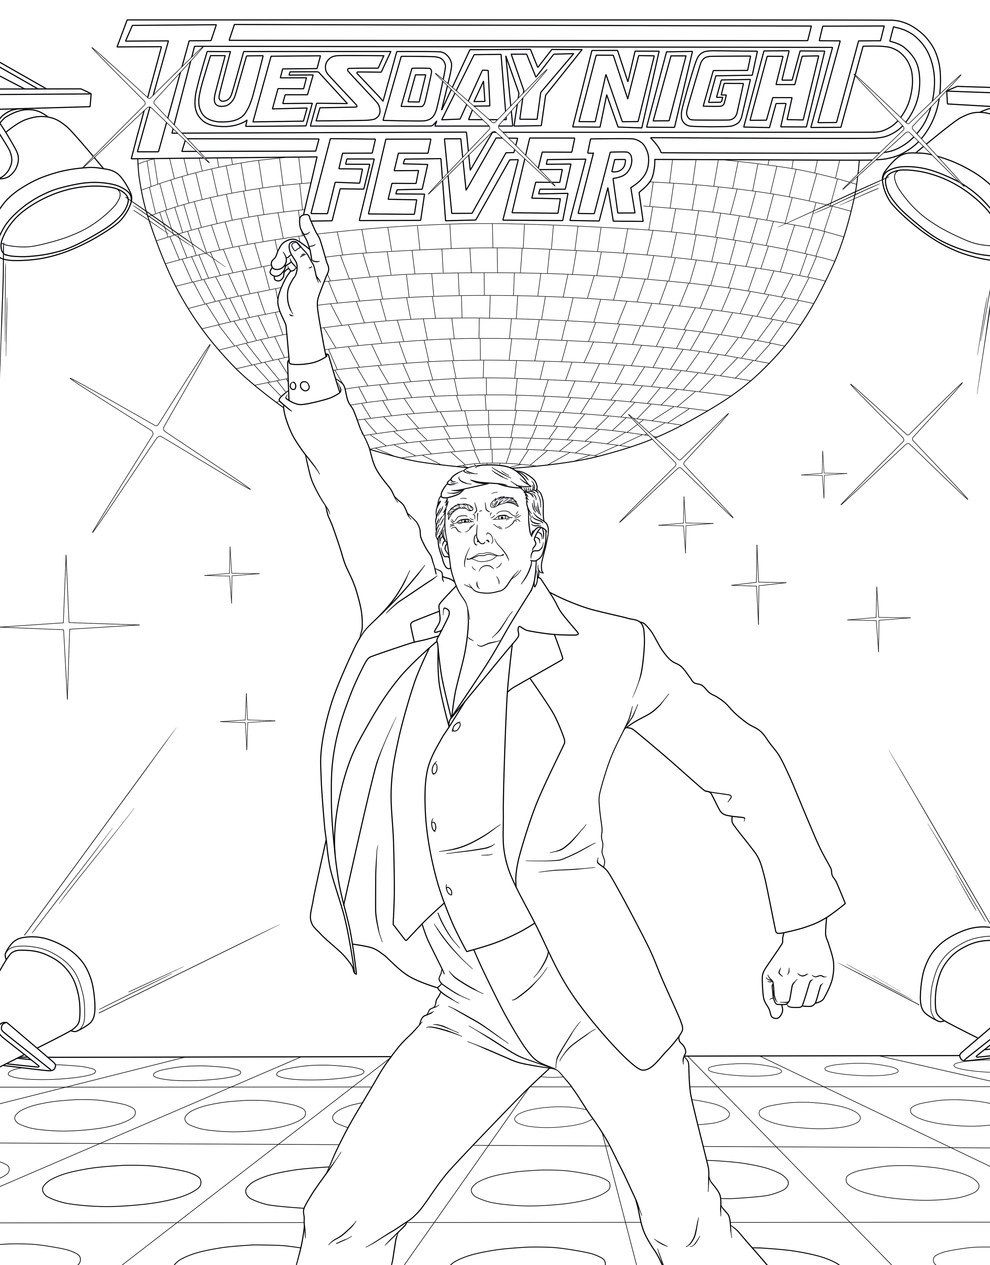 This Is What A Donald Trump Coloring Book For Adults Looks Like